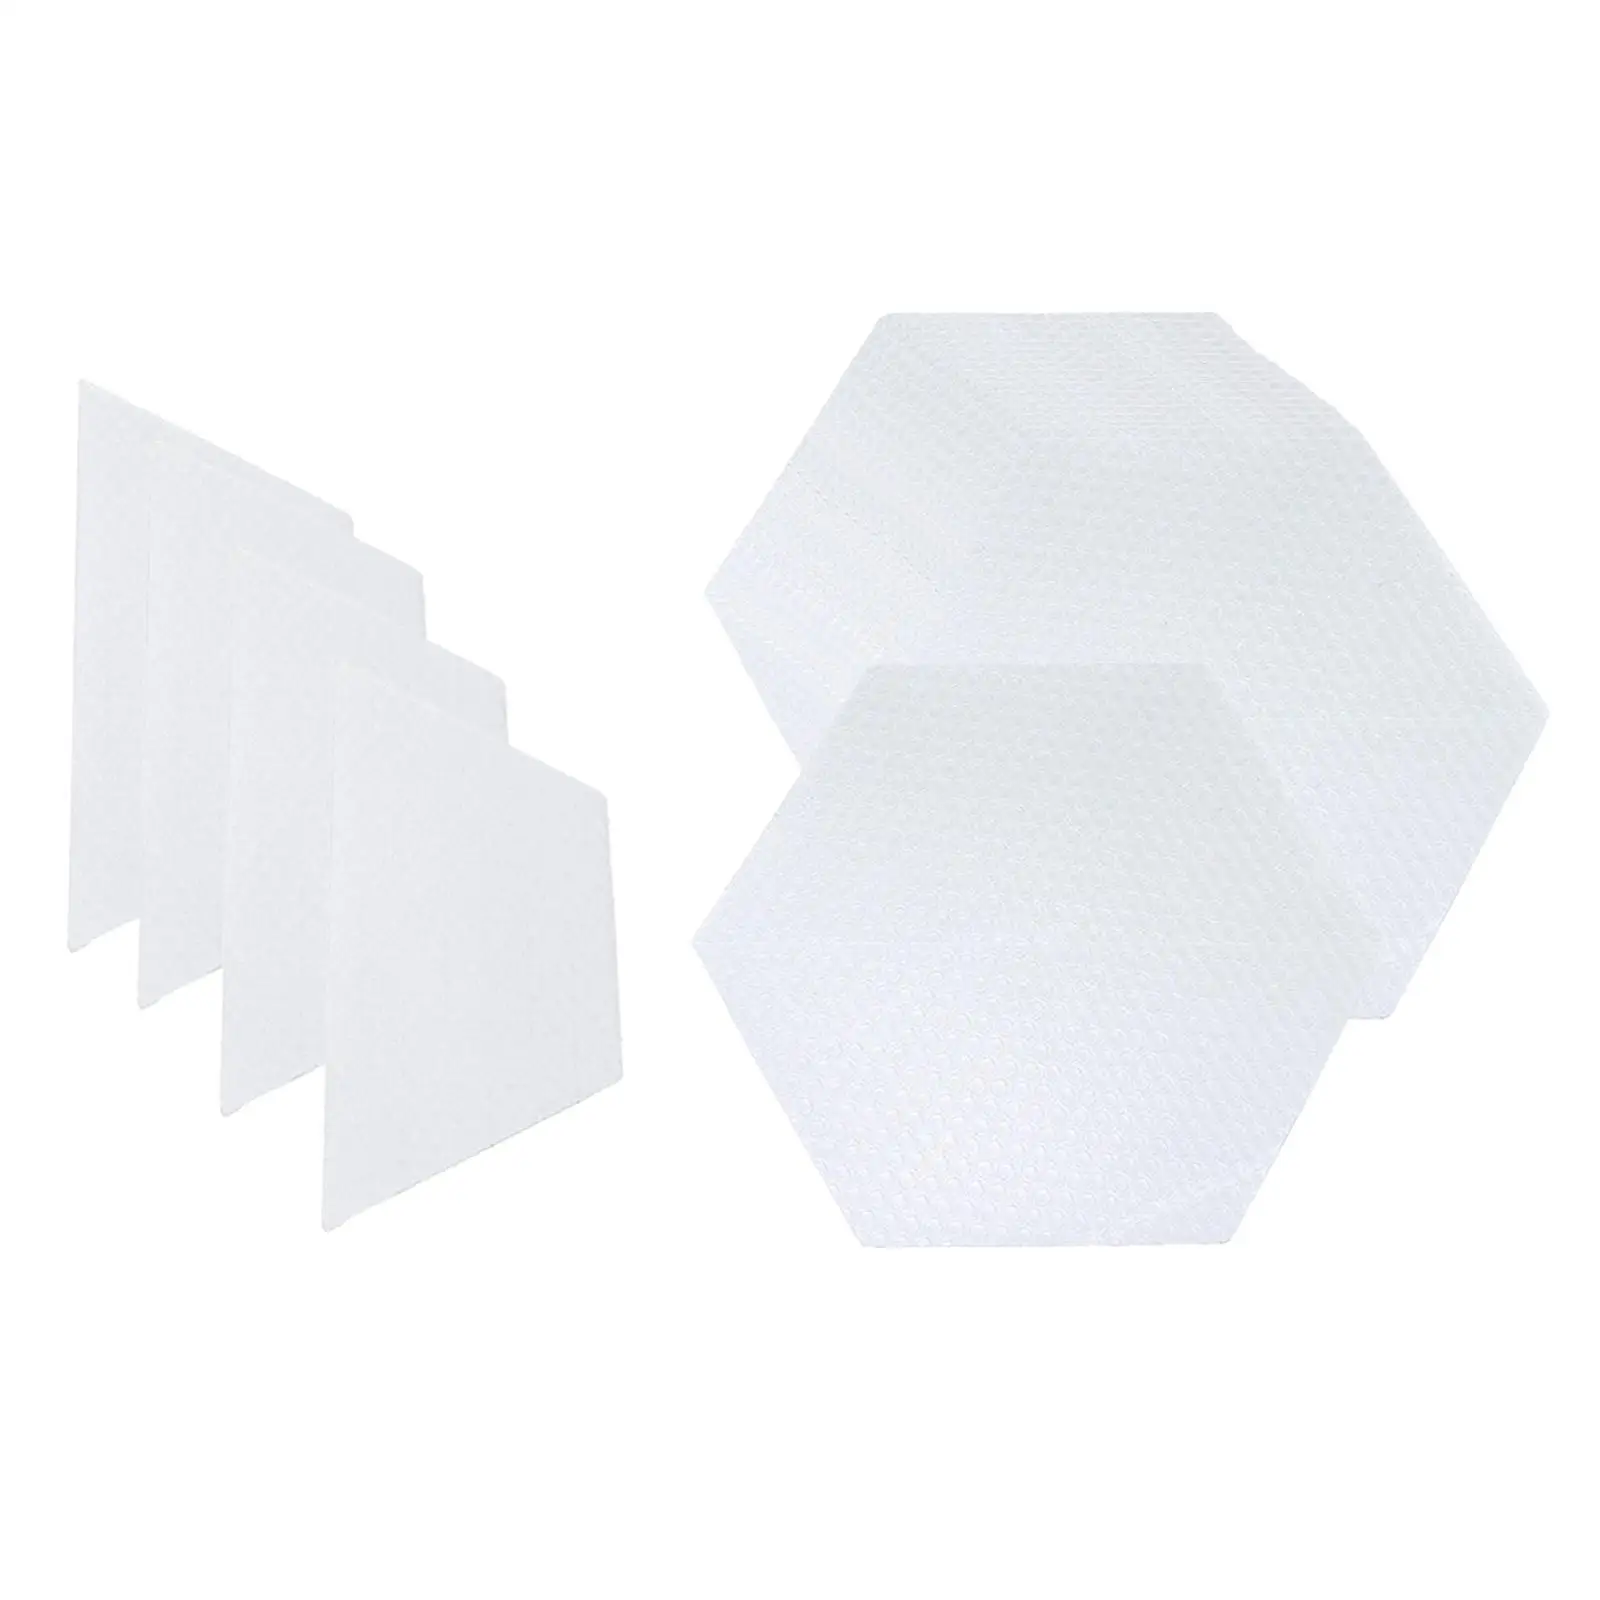 Adhesive Hexagon Surfboard Pads Water Surfing Accessories Deck Pads Surfpad